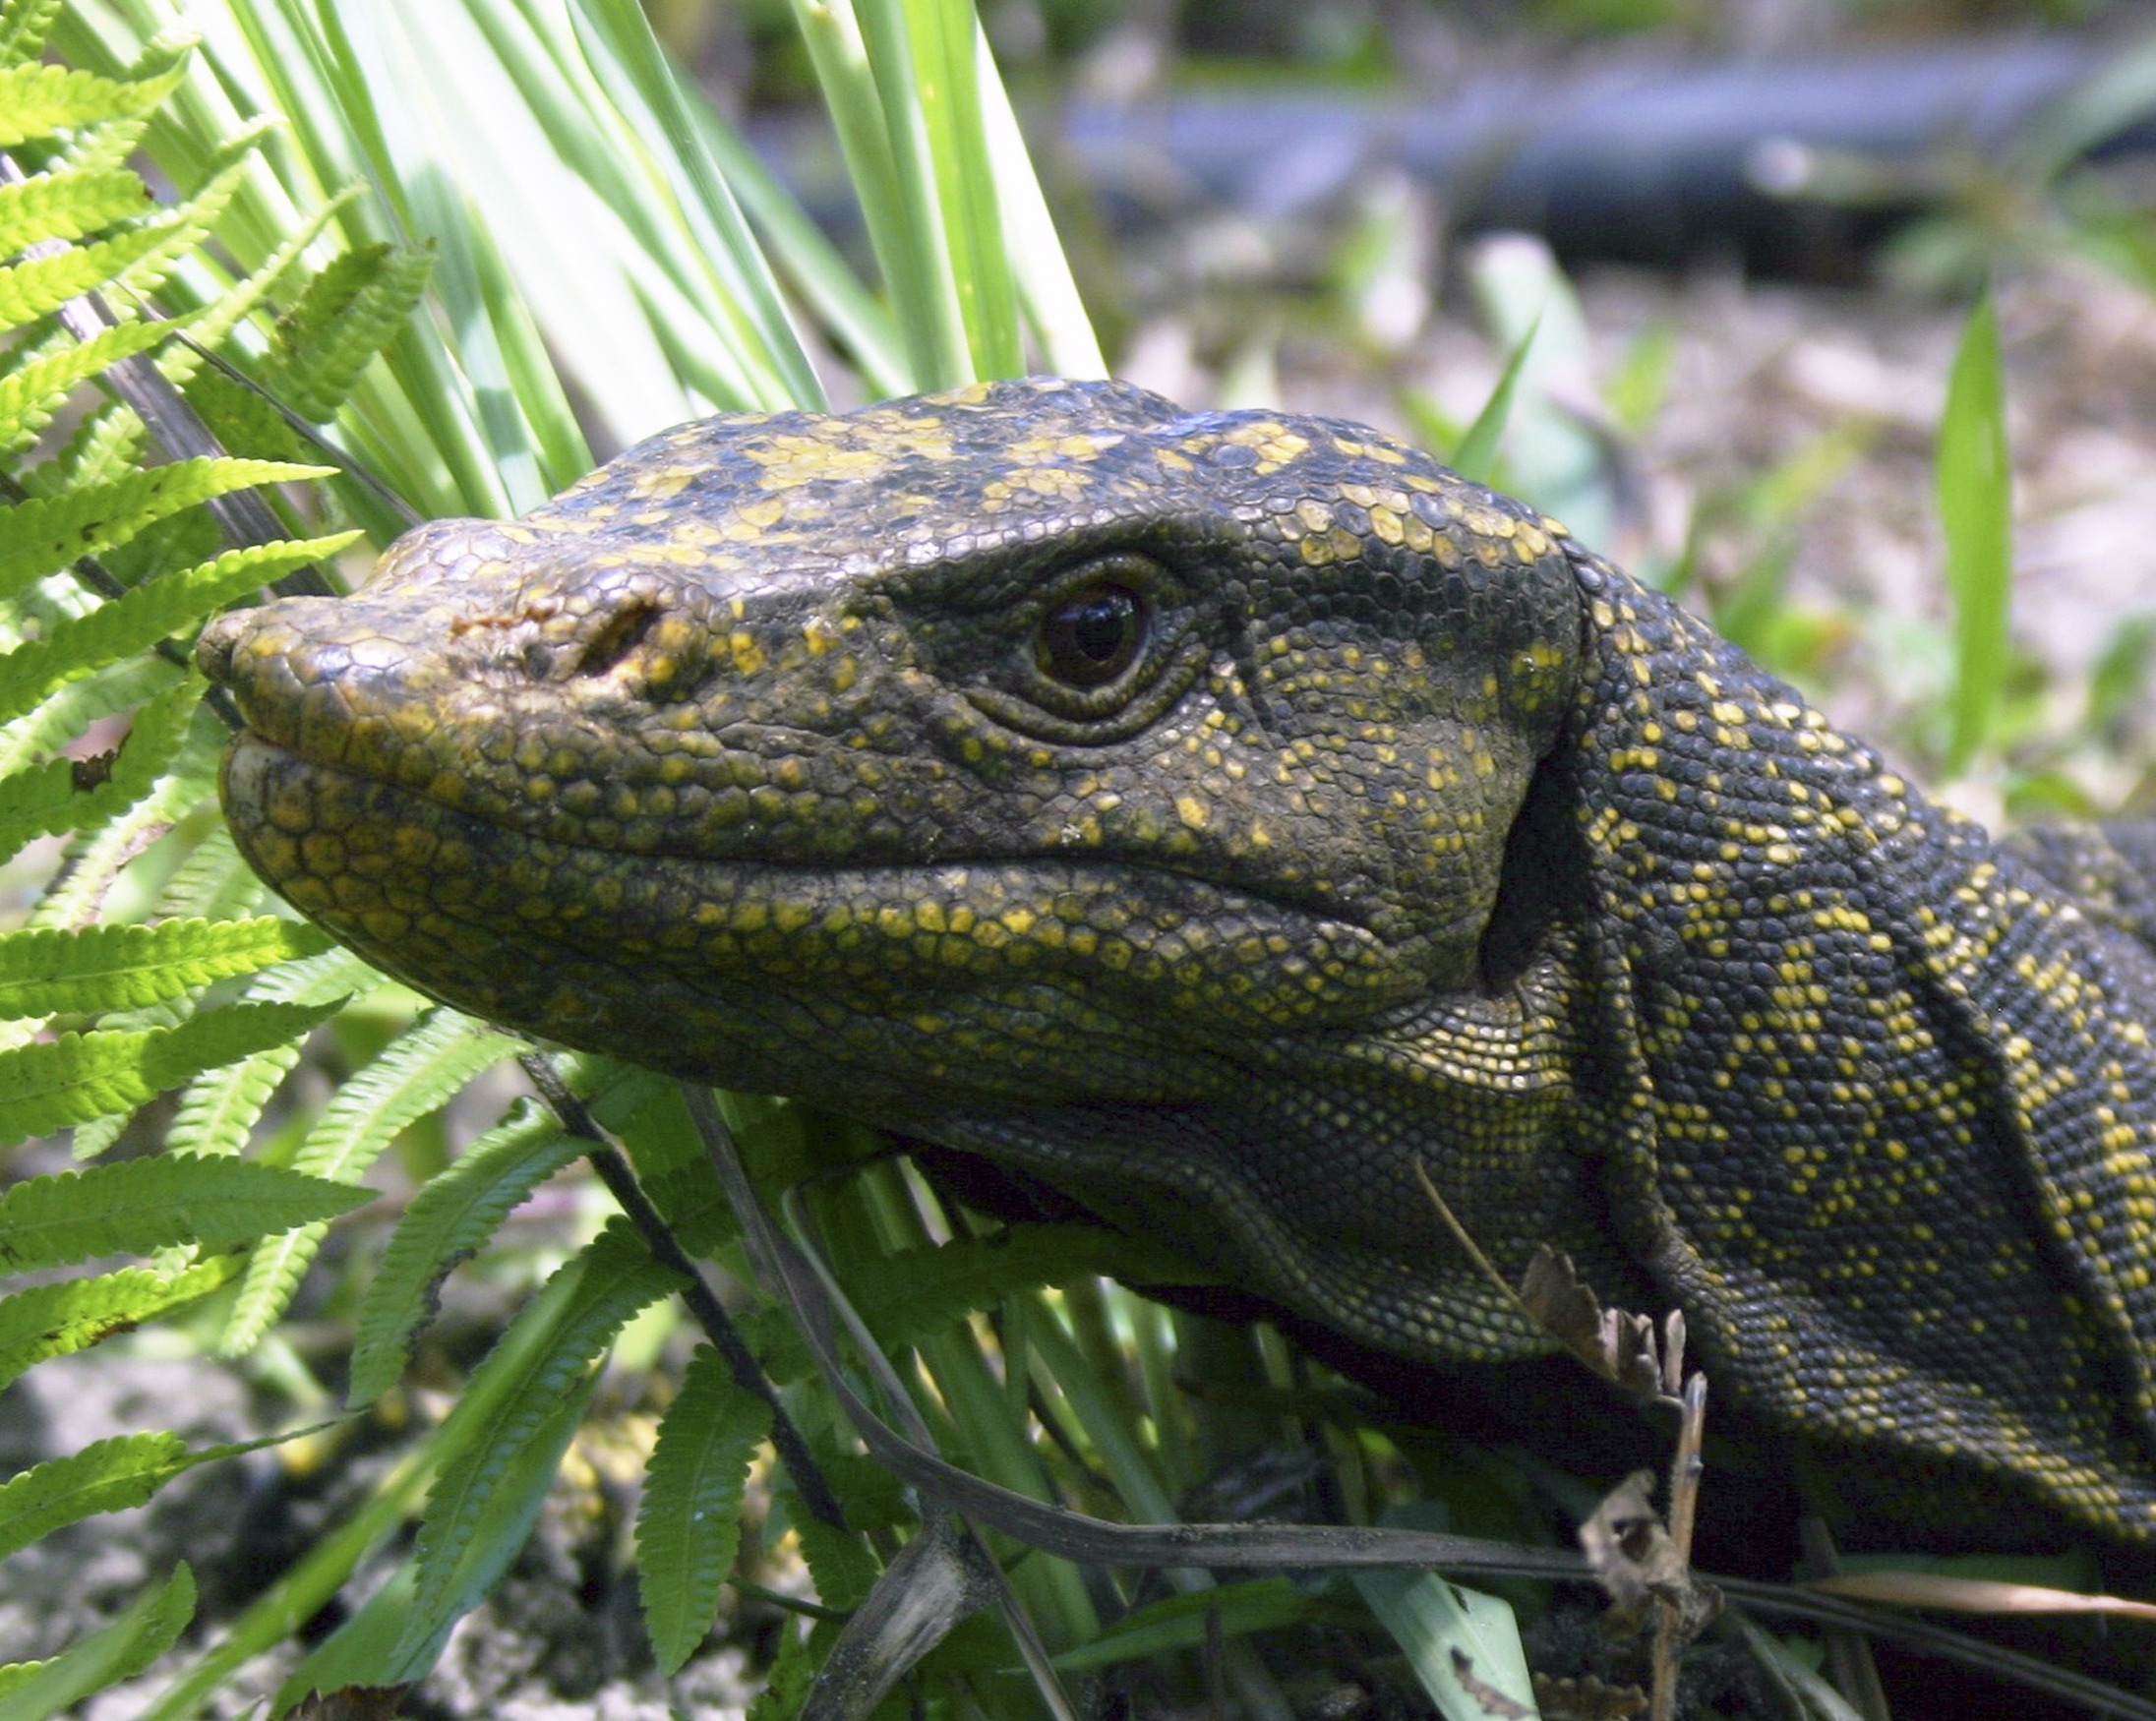 Dragon-sized lizard eluded science, until now